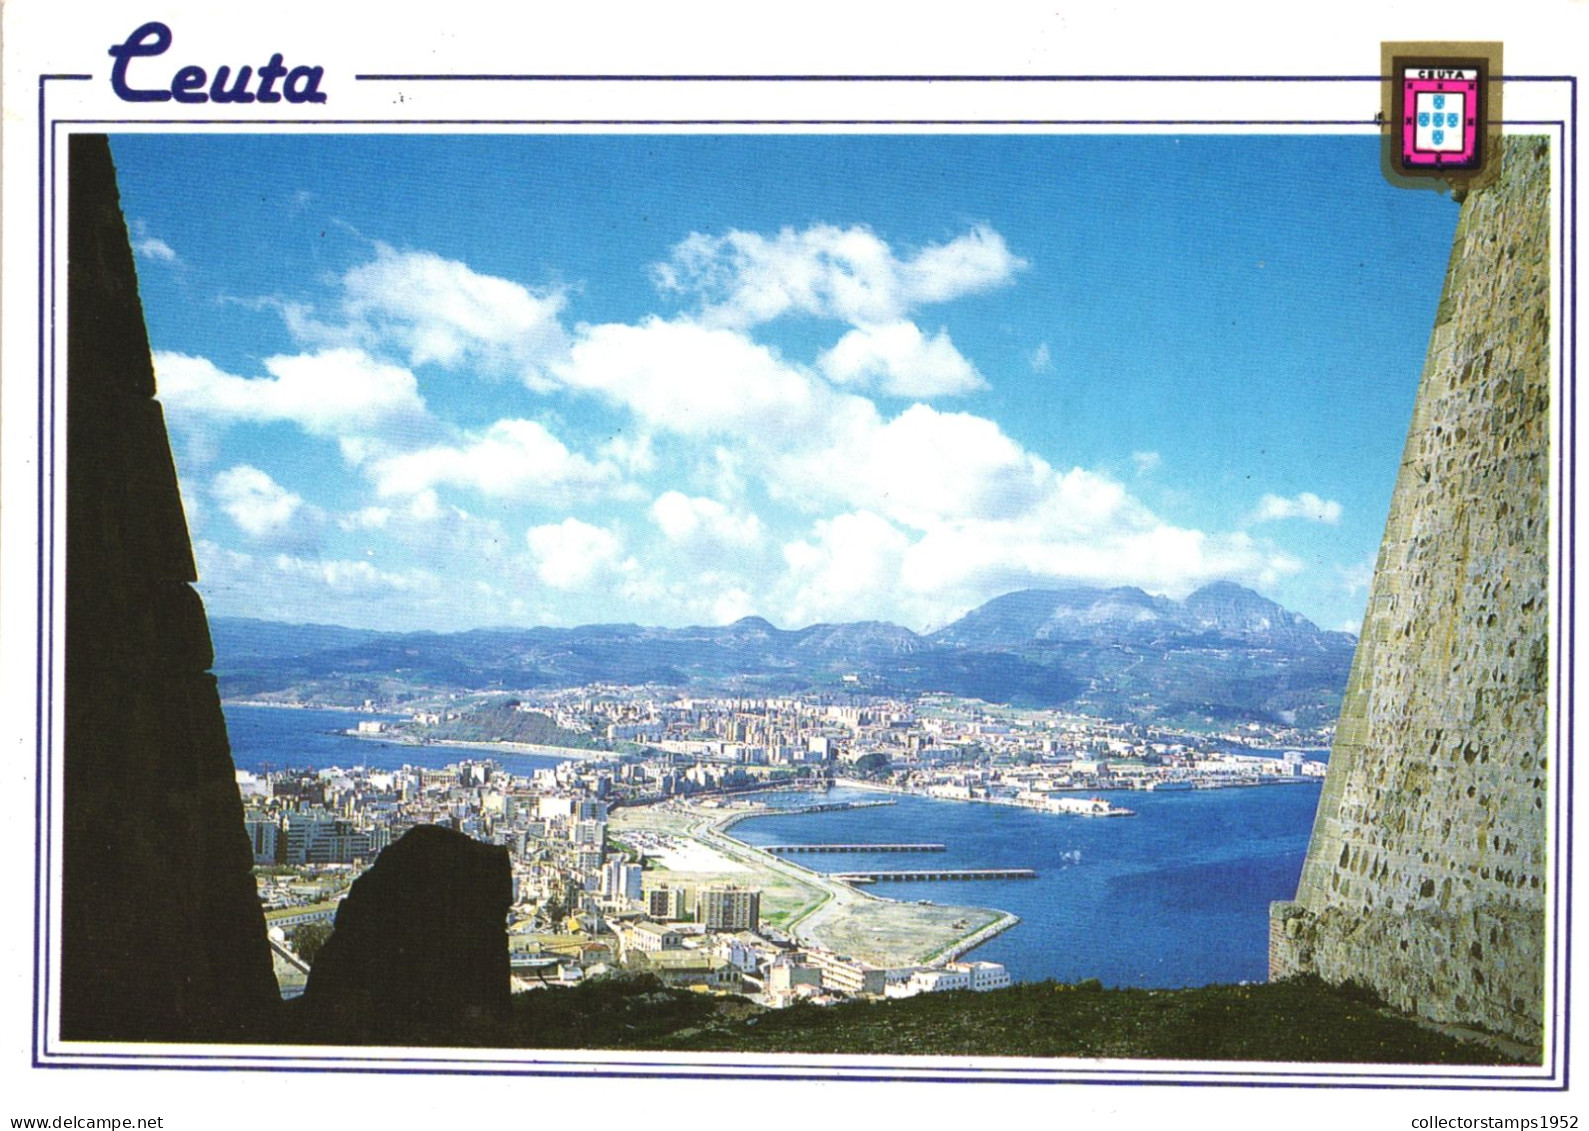 SPAIN, CEUTA, PANORAMA, FROM FORTRESS OF THE MONTE HACHO - Ceuta